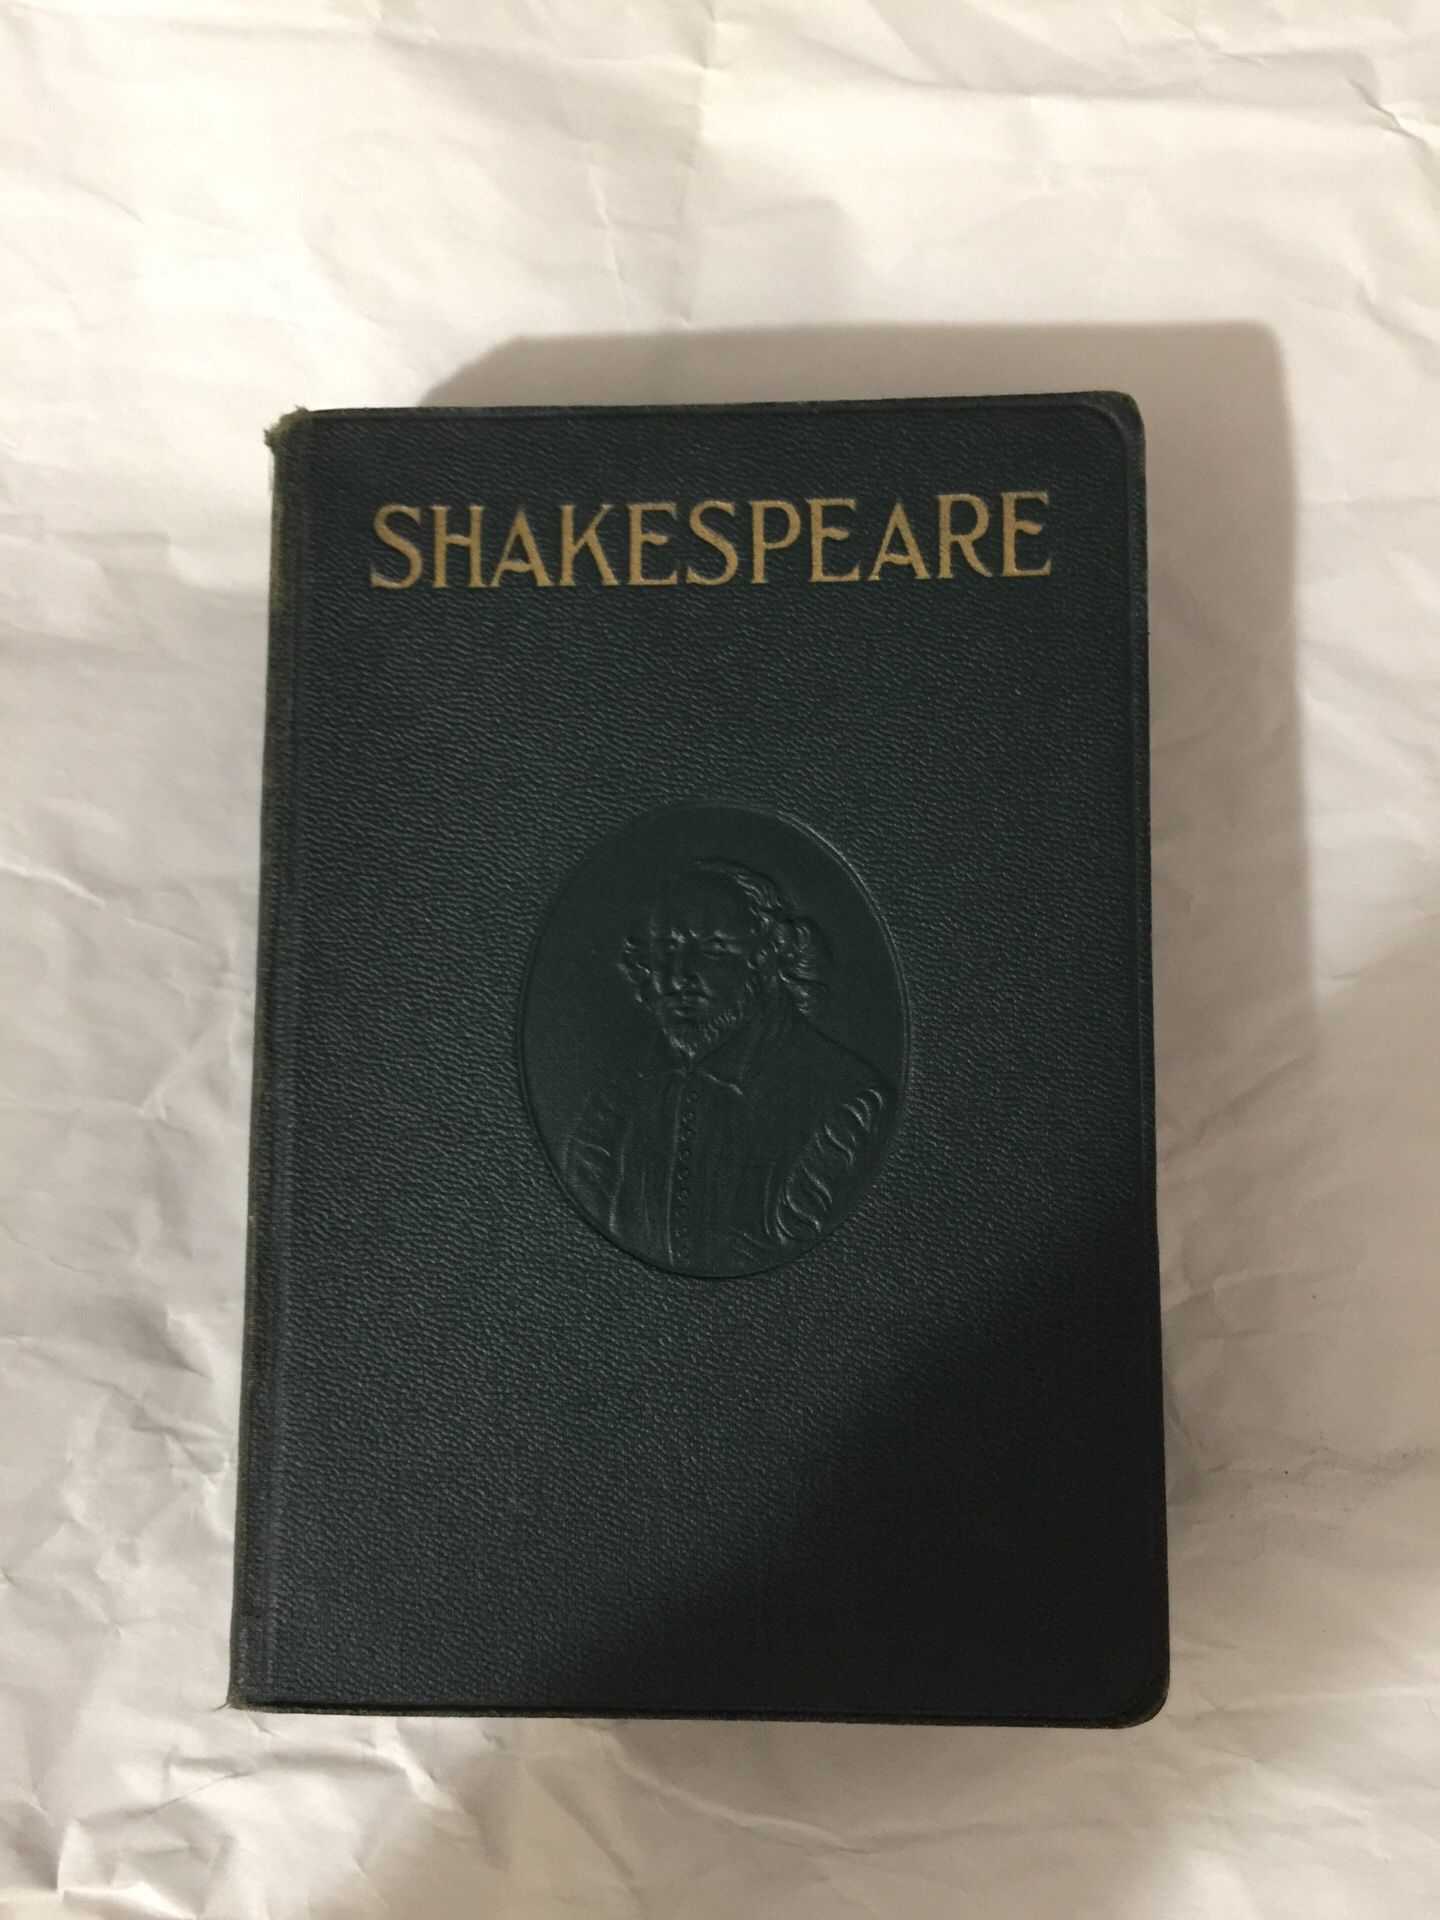 Very old William Shakespeare book